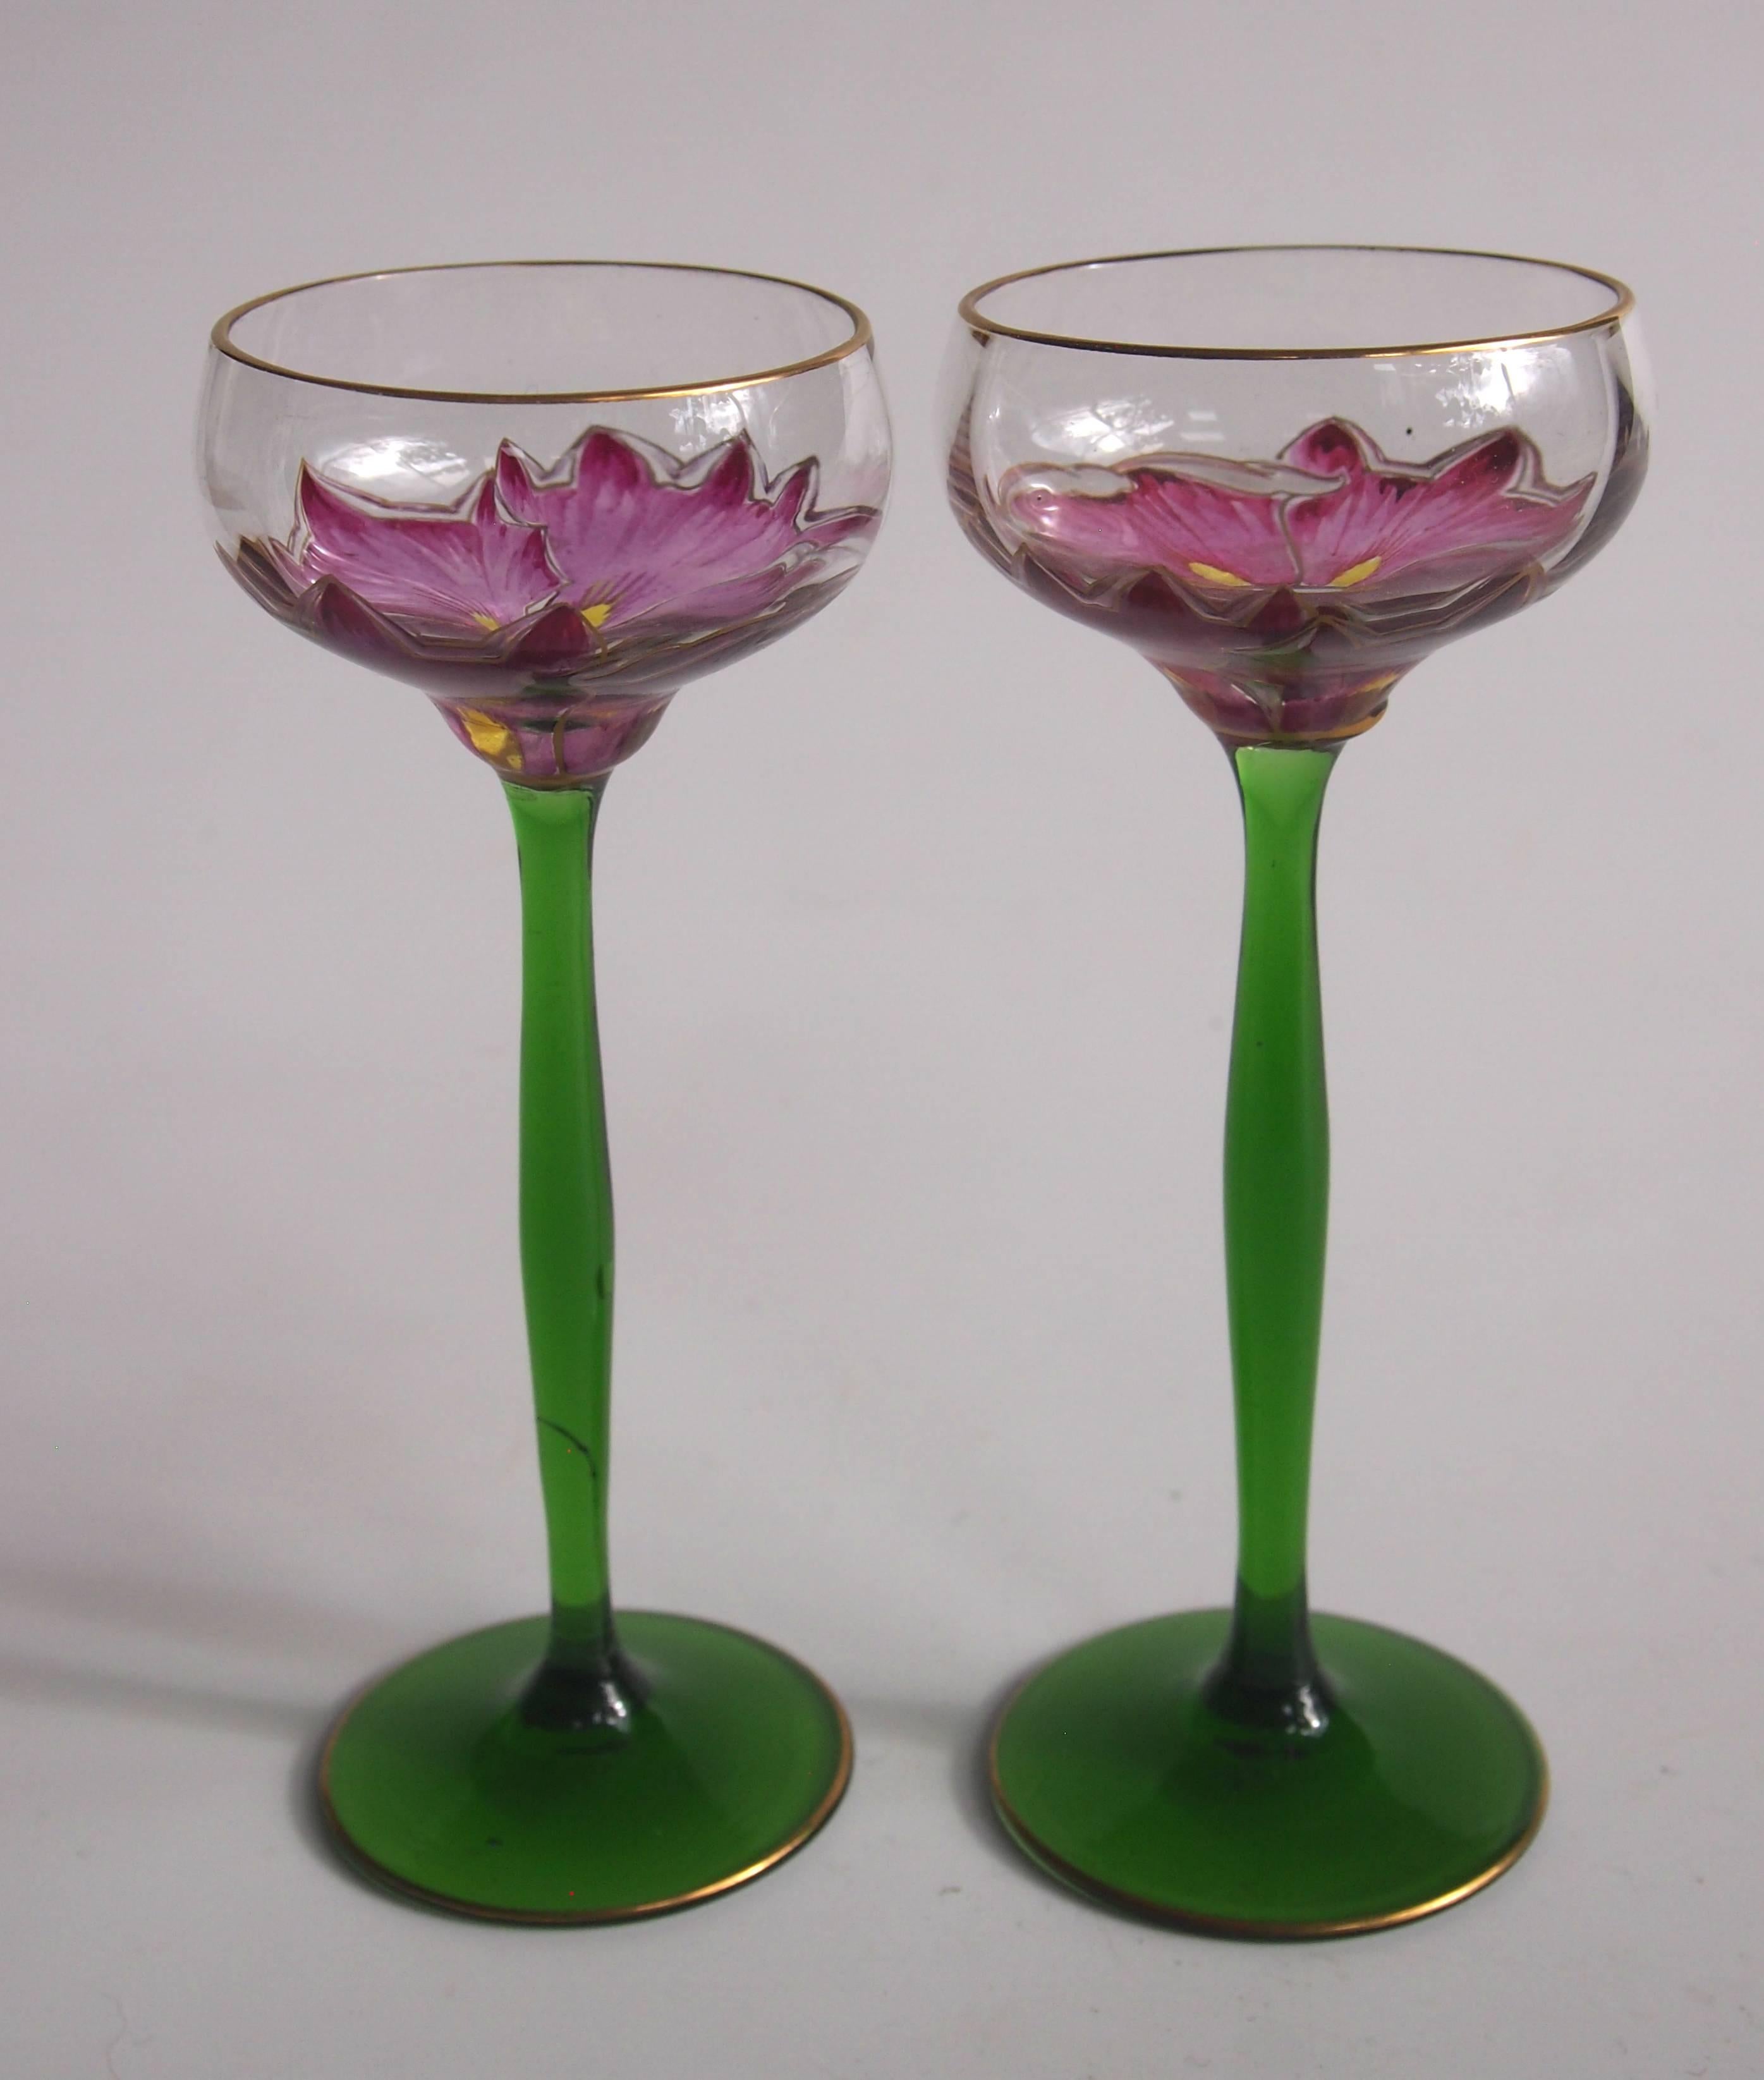 Super pair of Art Nouveau gilded, green stemmed and enamelled, Meyr's Neffe 'Flower' glasses. They are enamelled with an open flower around the bowl so only when you drink from them do you get the full effect of the flower. 

'Flower' glasses were